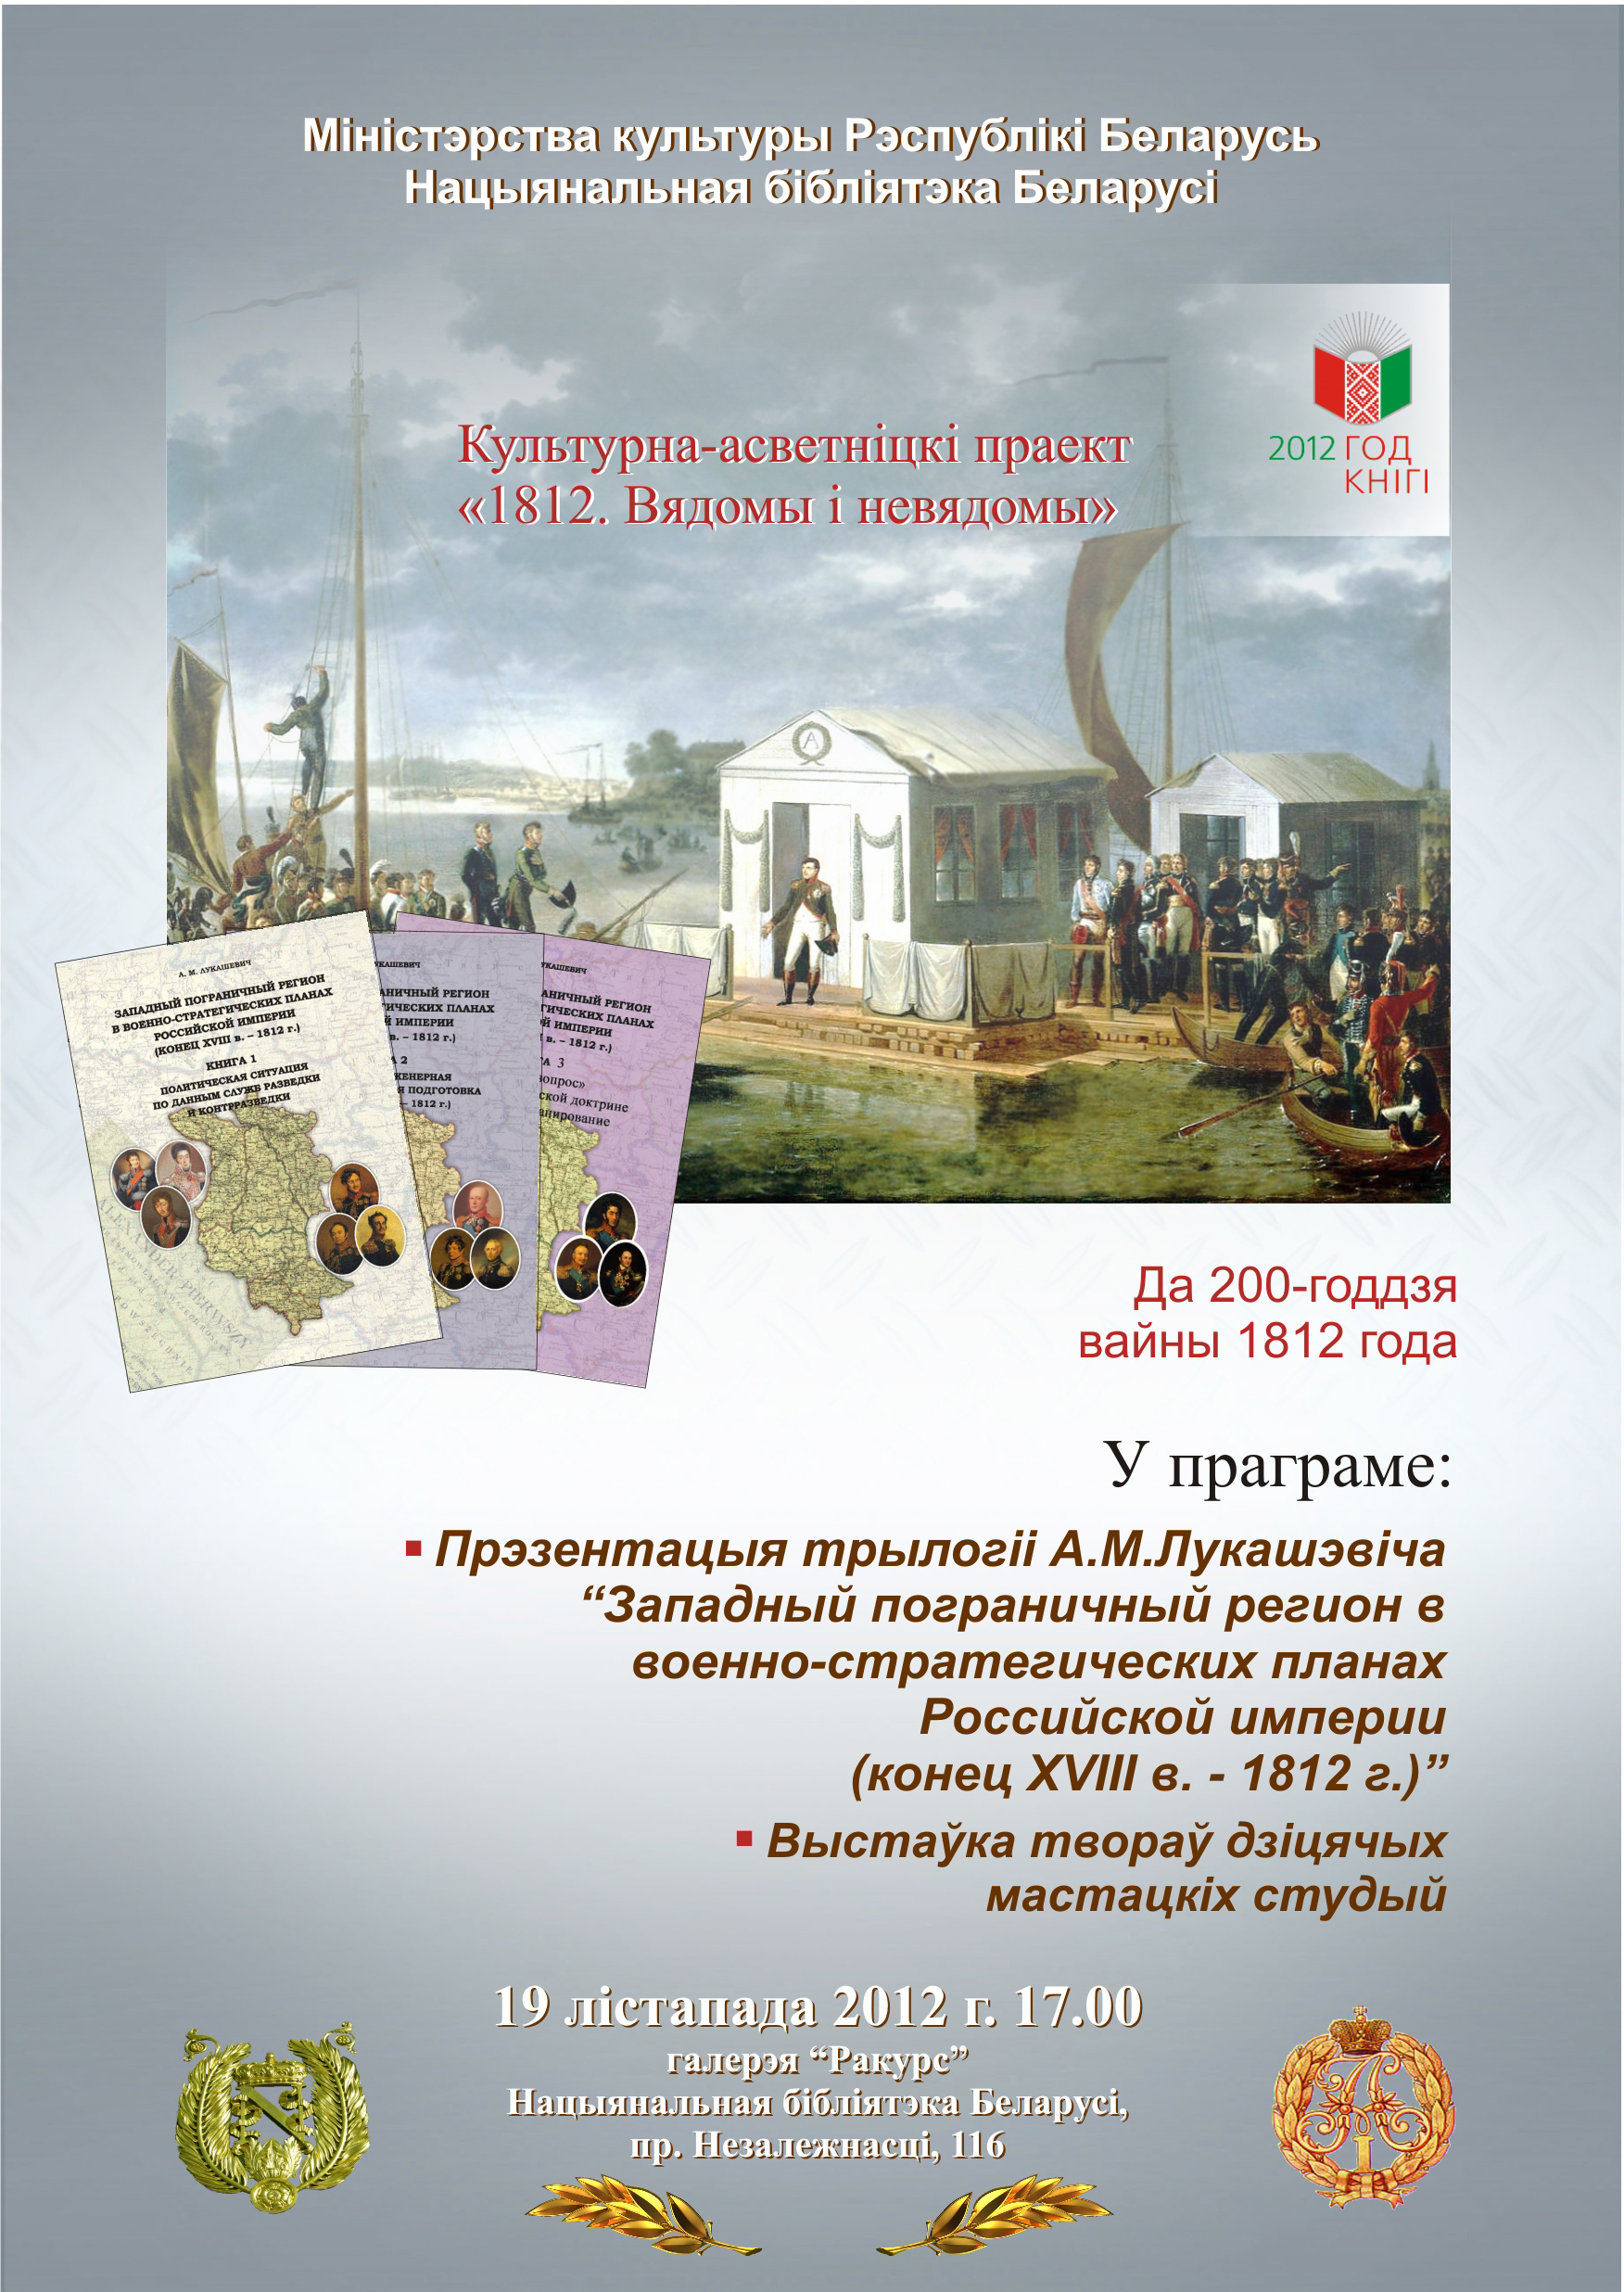 Presentation of the project “1812. Known and unknown”